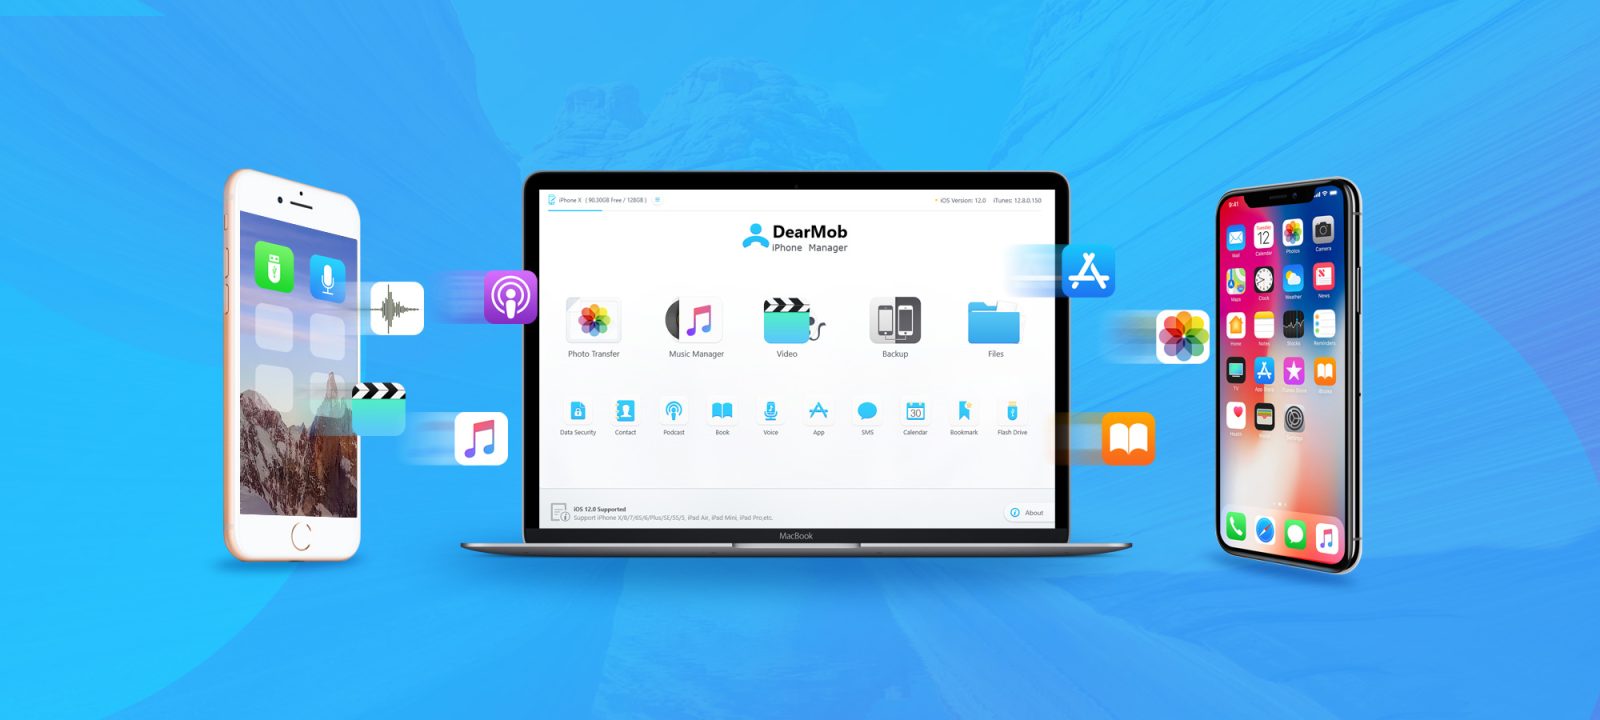 Backup & restore apps & data selectively w/ Dearmob iPhone Manager, free for iOS 12 - 9to5Mac